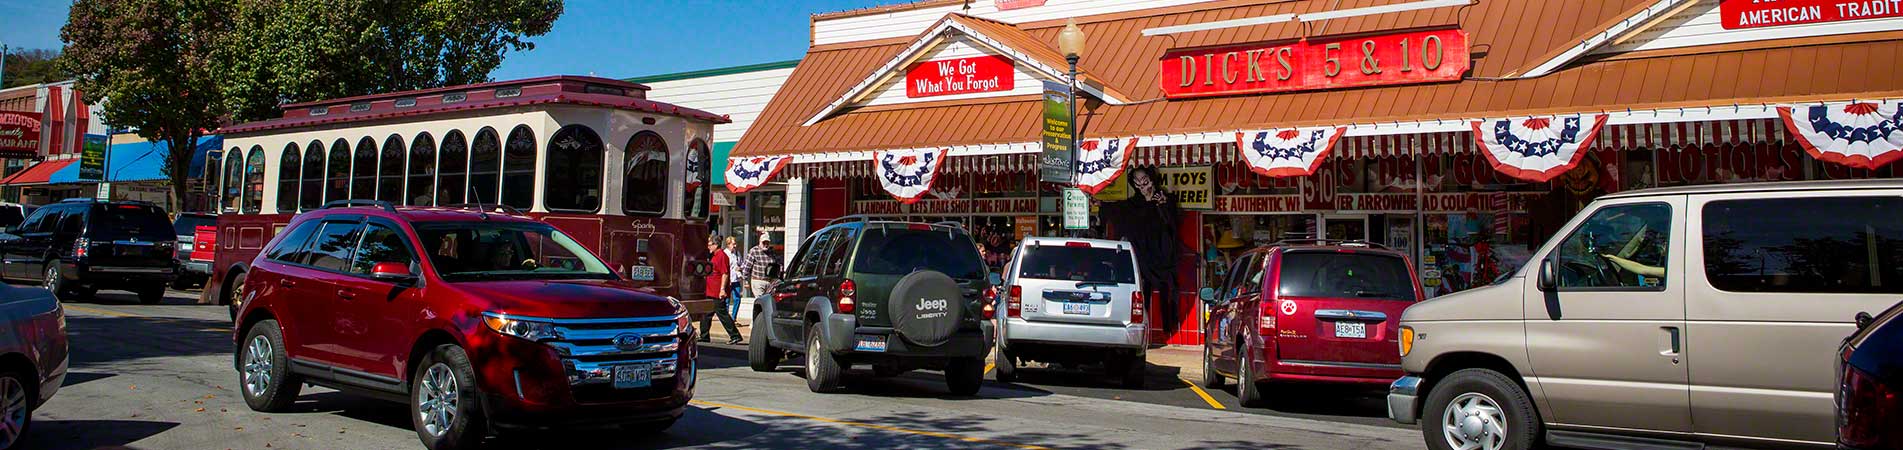 One of the most accurate small town pictures of Branson, Missouri.